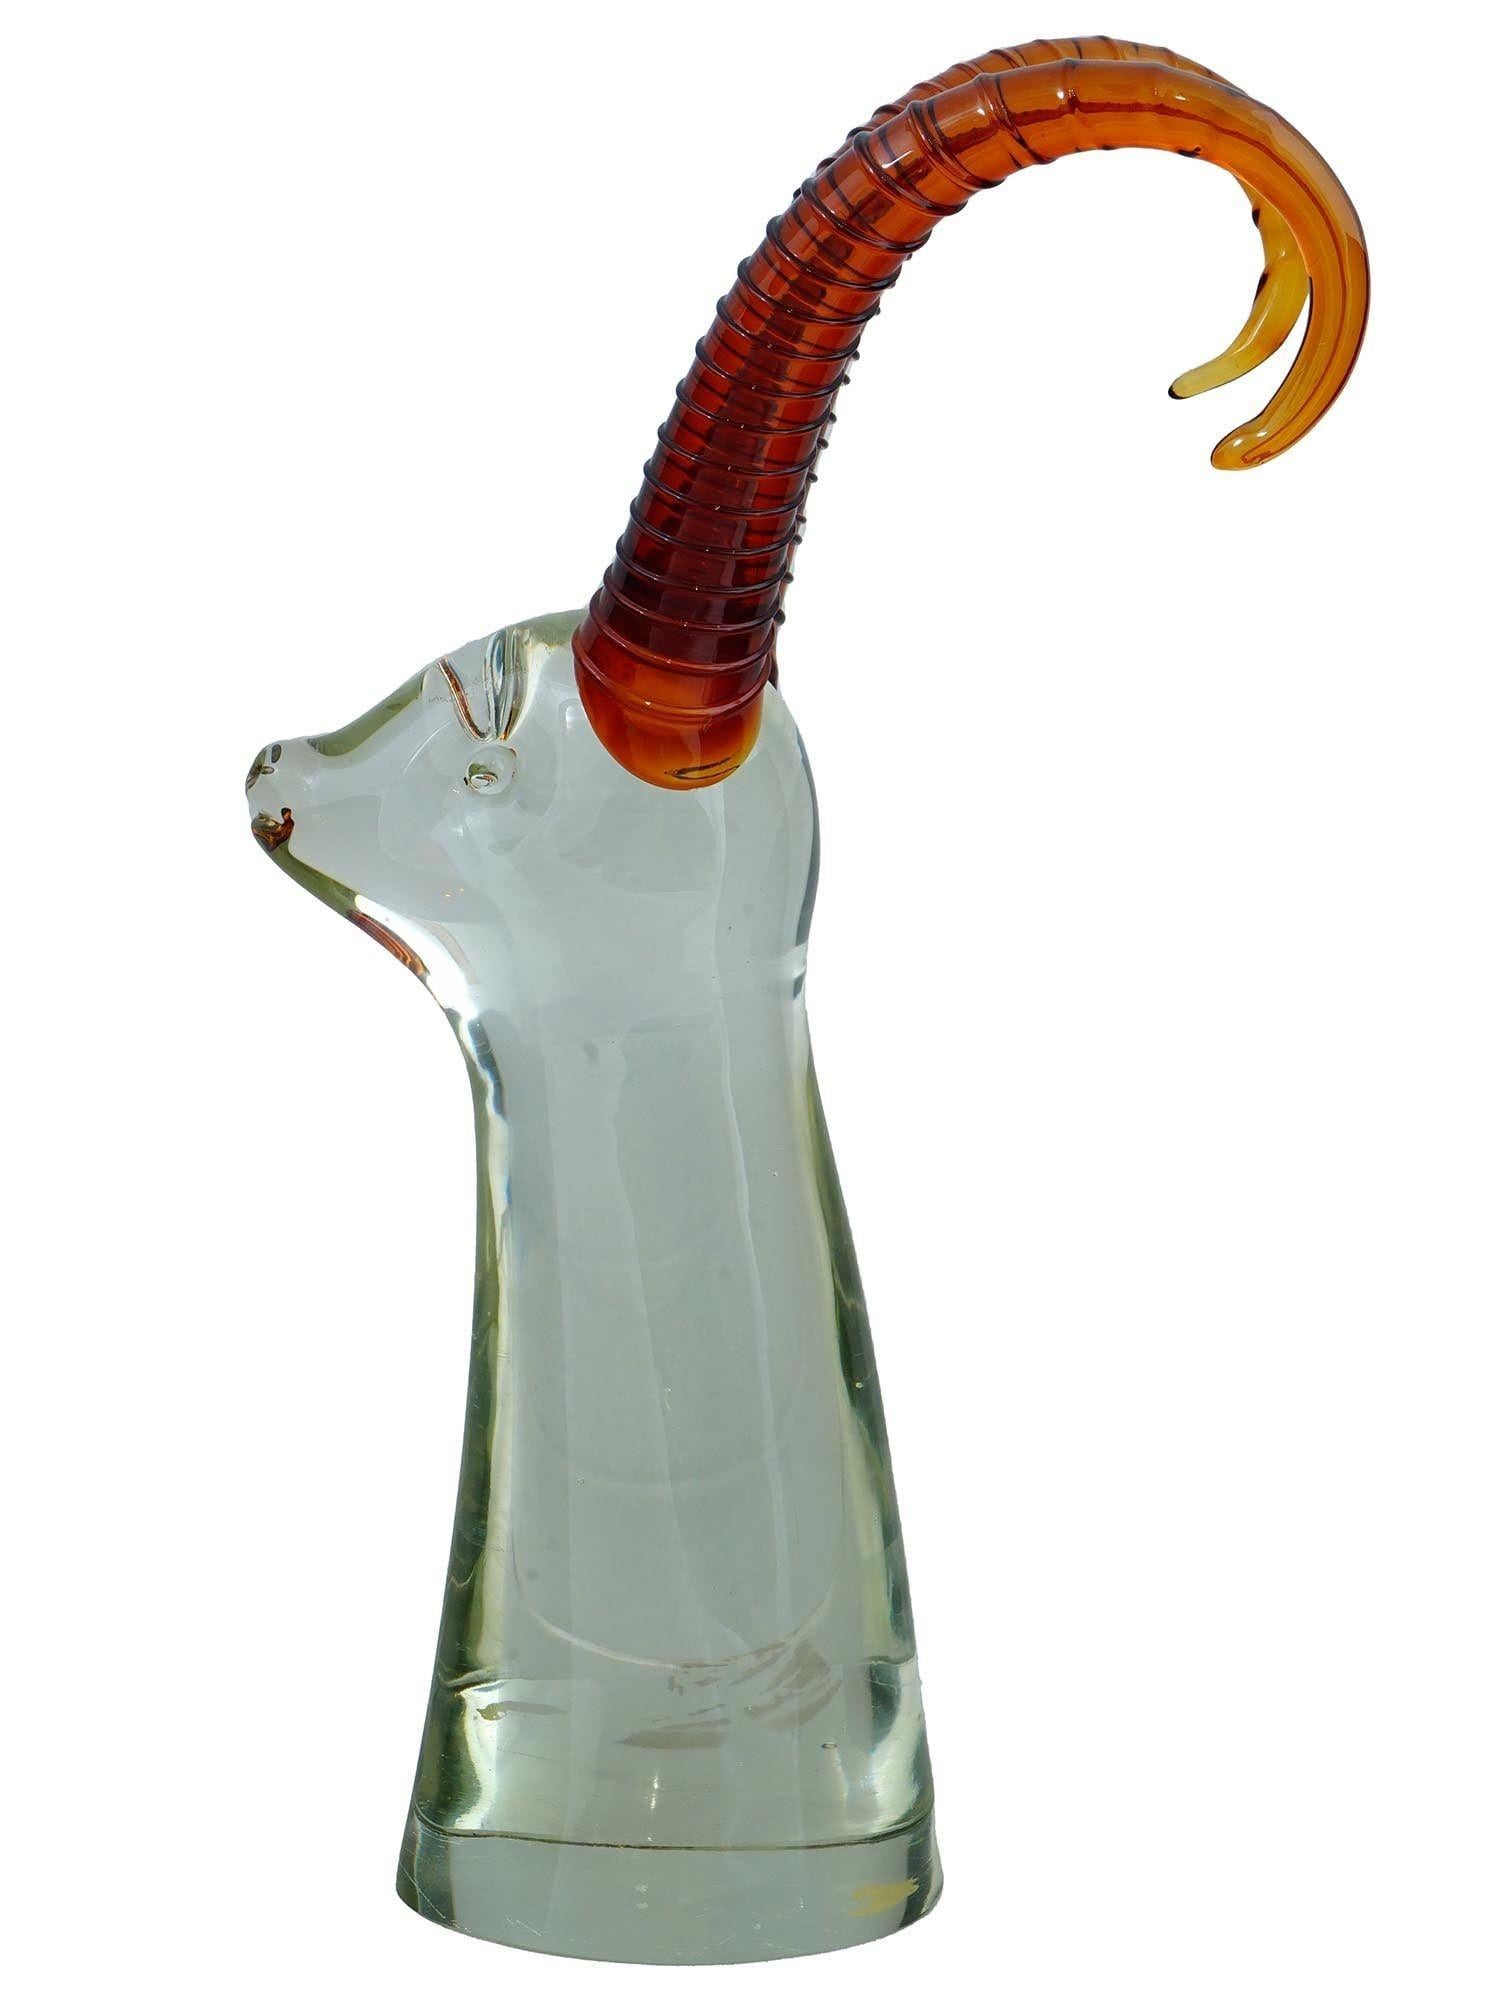 Very large mid-century hand-blown Murano glass sculpture depicting the bust of an antelope in clear glass with amber colored horns.  With its original paper label from the studio, Alvin. 18 3/4 inches tall and in very good condition.